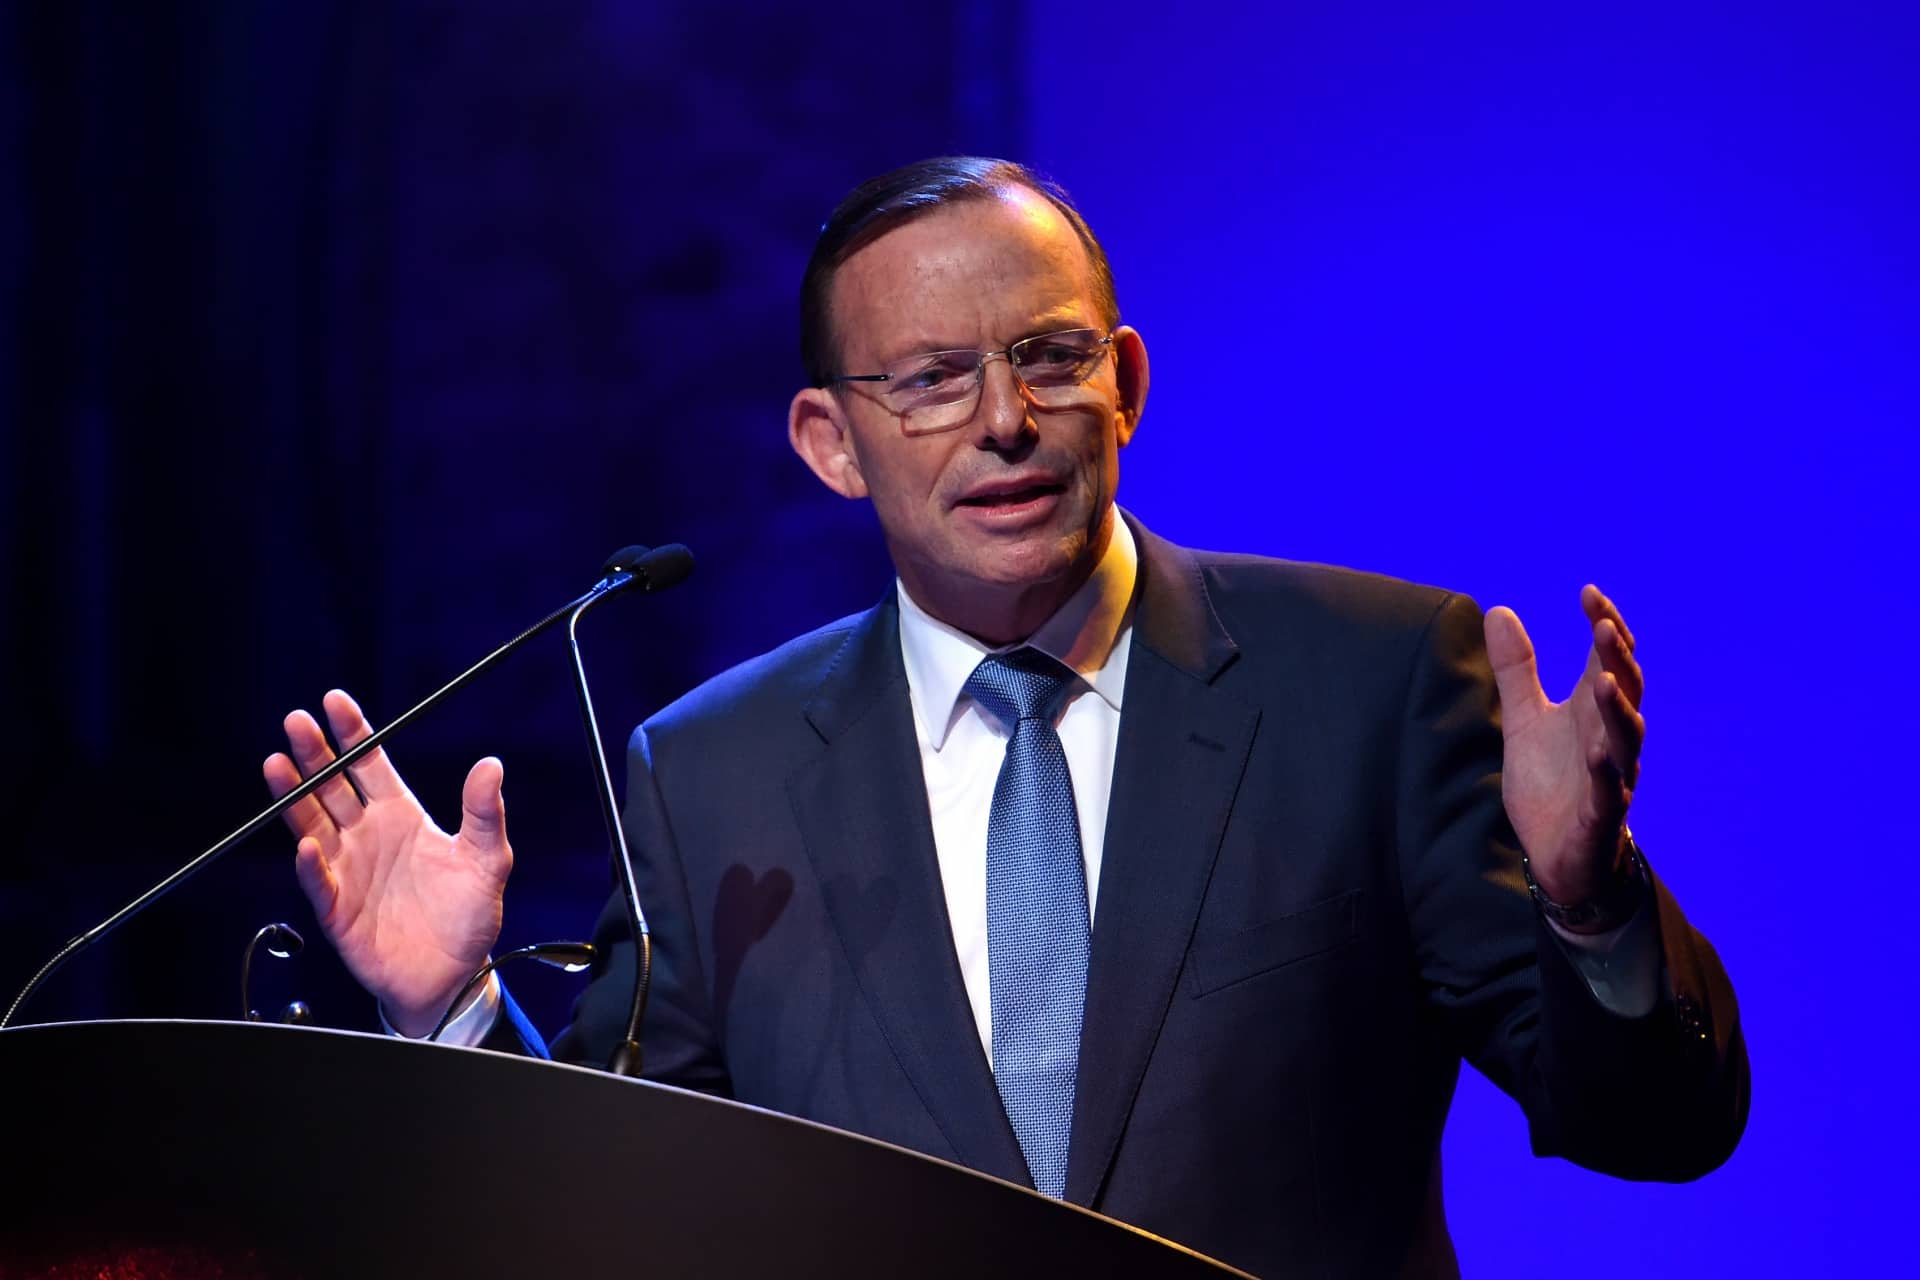 Ex-Aussie PM Abbott lashes out at ‘virus hysteria’ and ‘unaccountable’ scientists